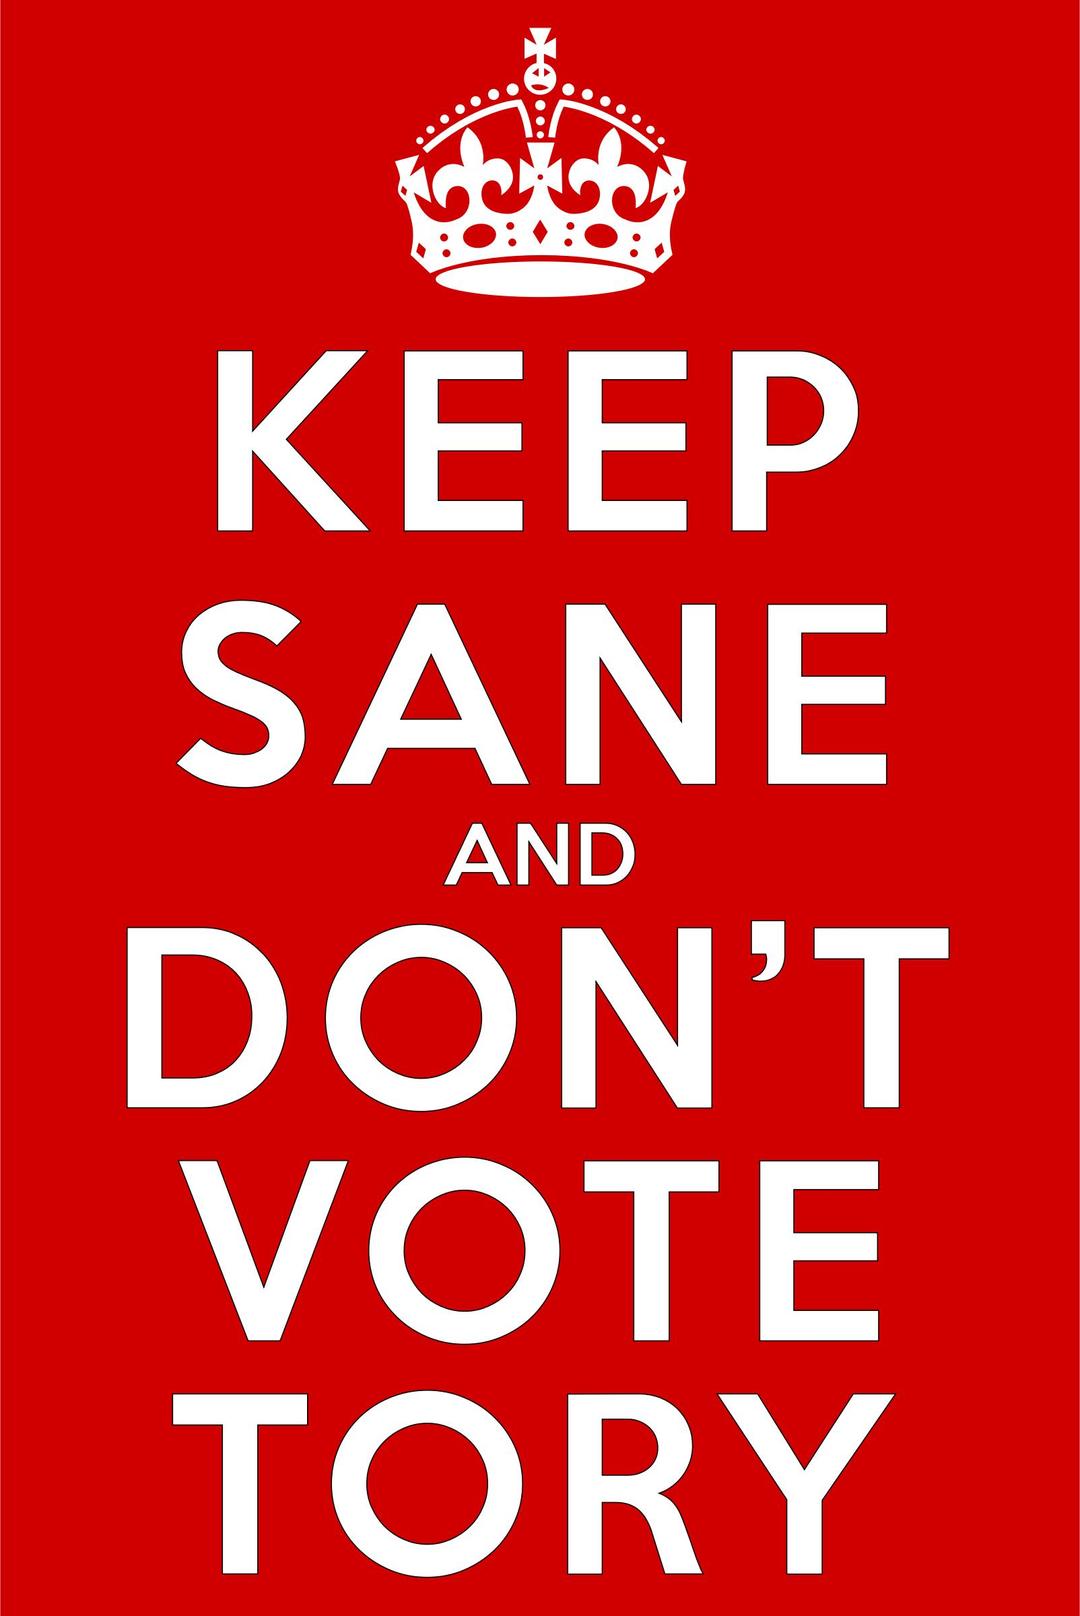 Keep Sane and Don't Vote Tory png transparent